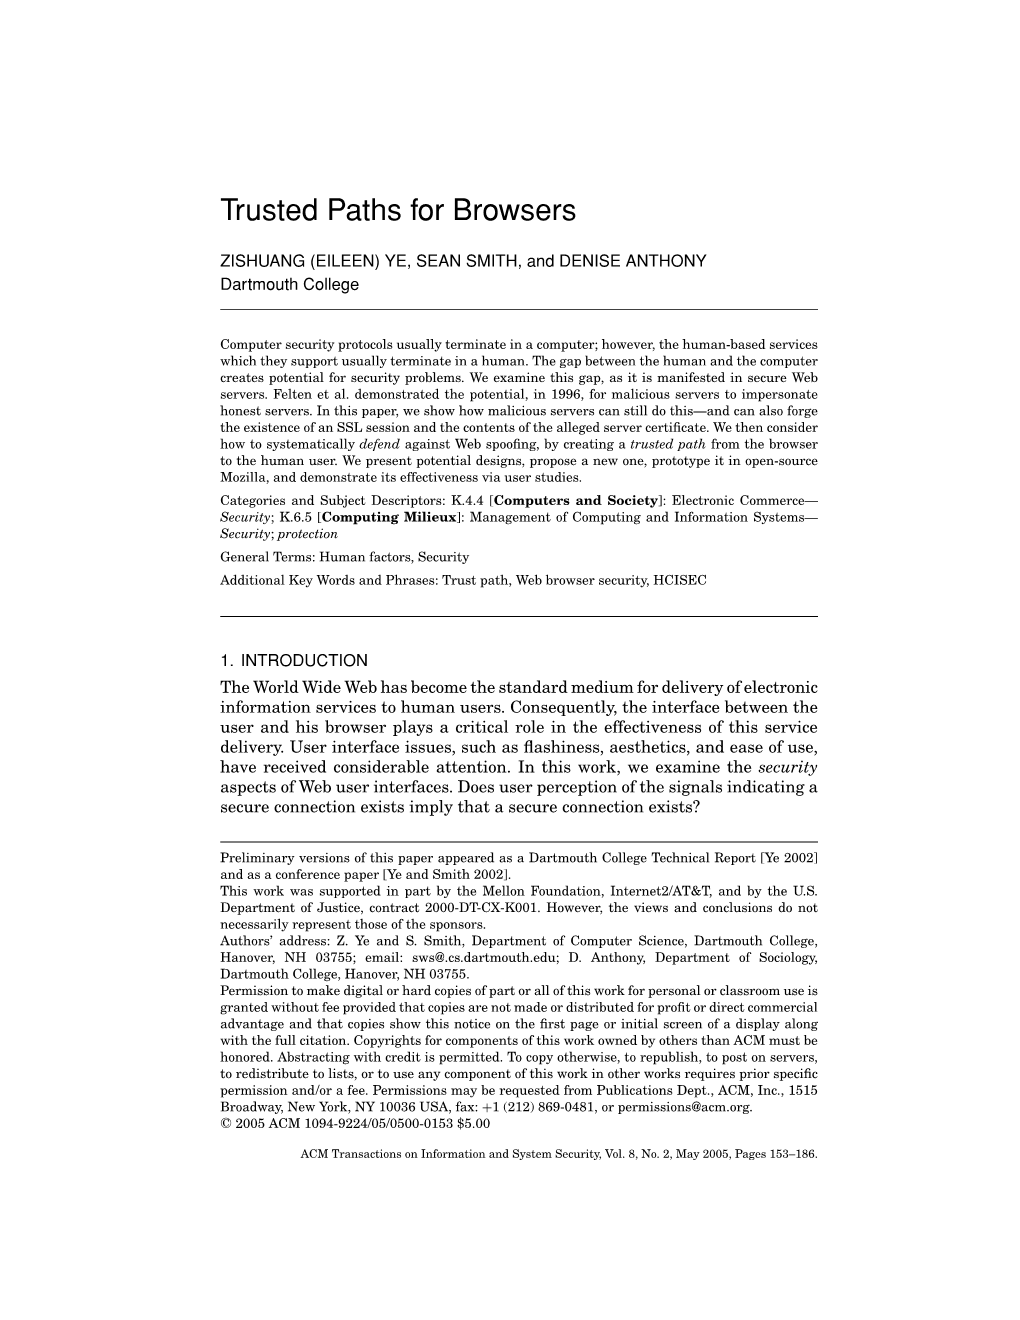 Trusted Paths for Browsers